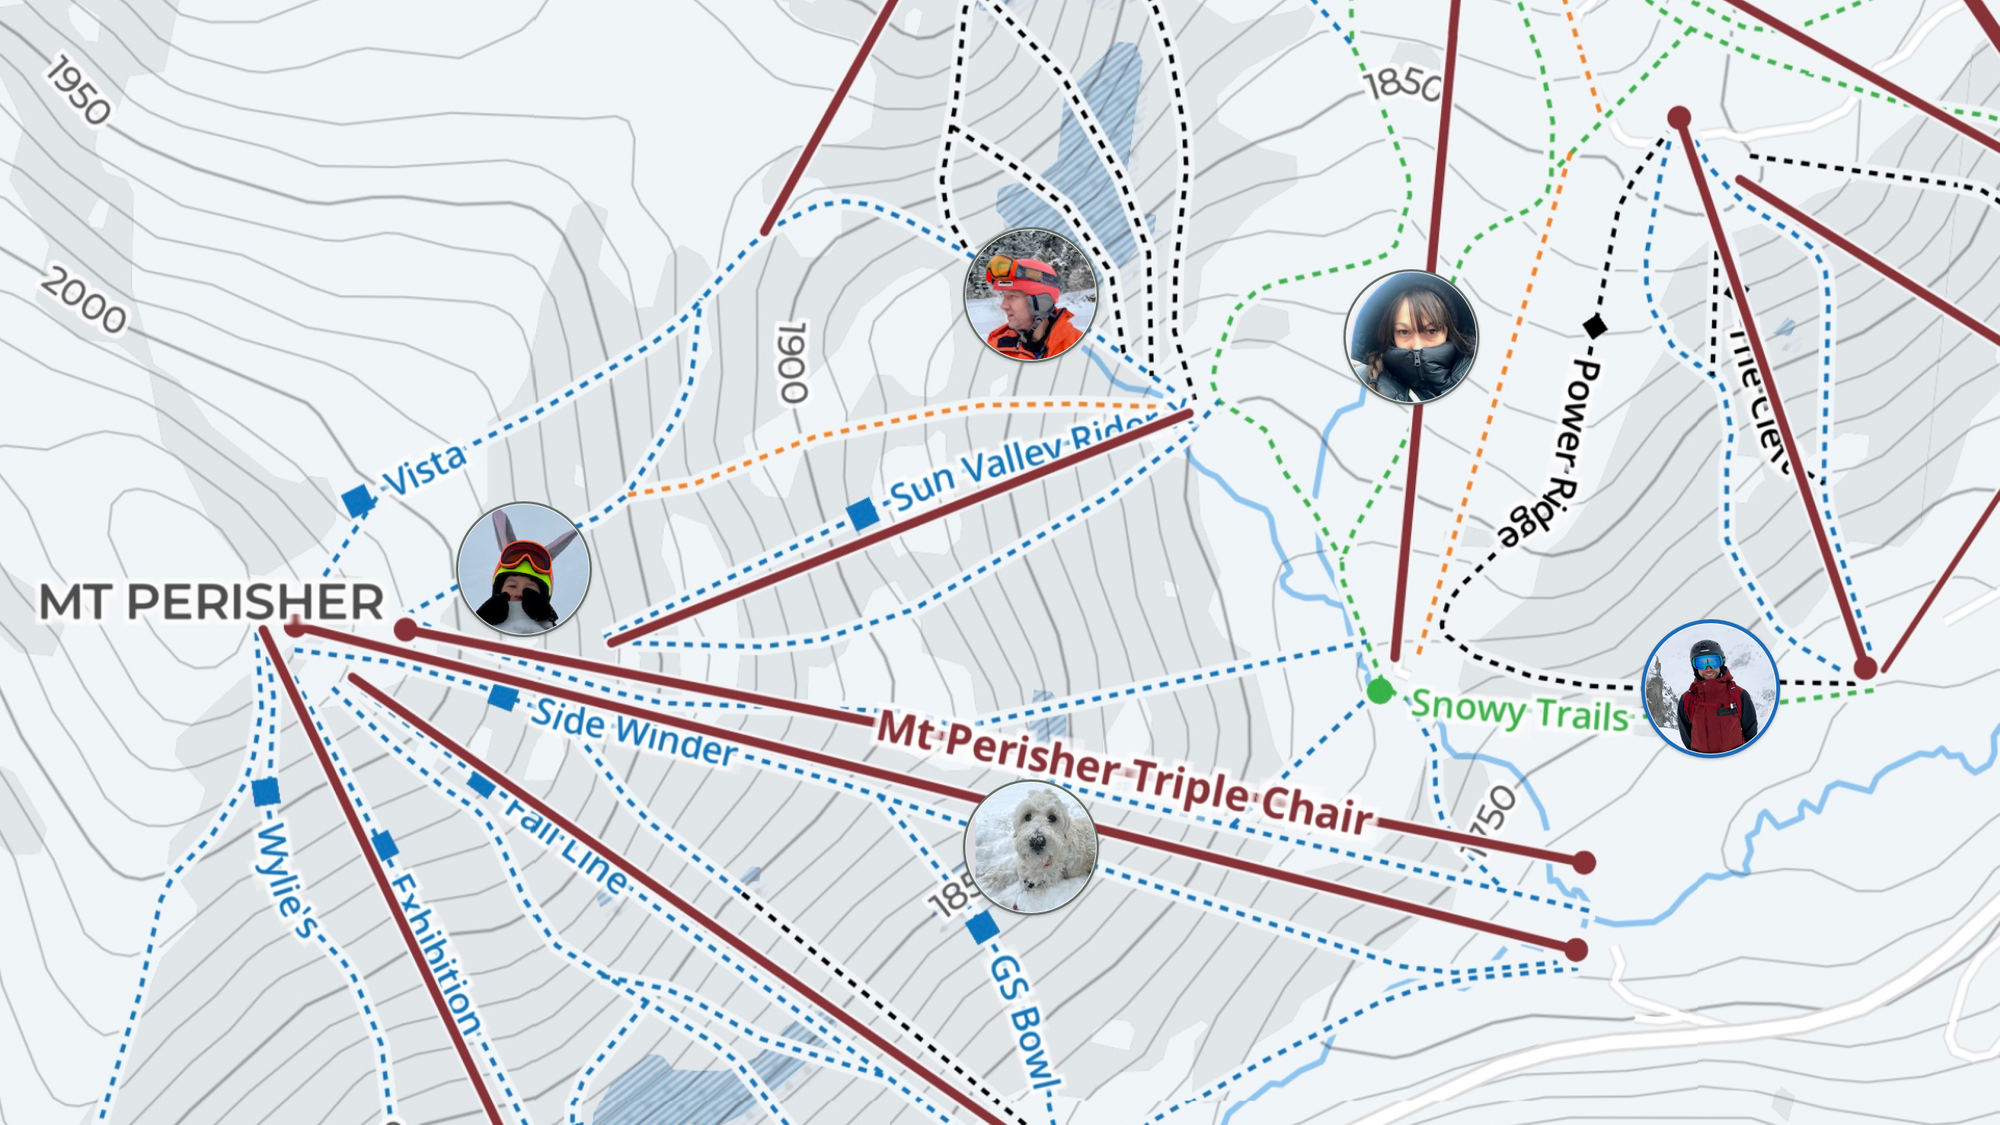 Ride on Interactive Ski Maps at over 400 Resorts Worldwide